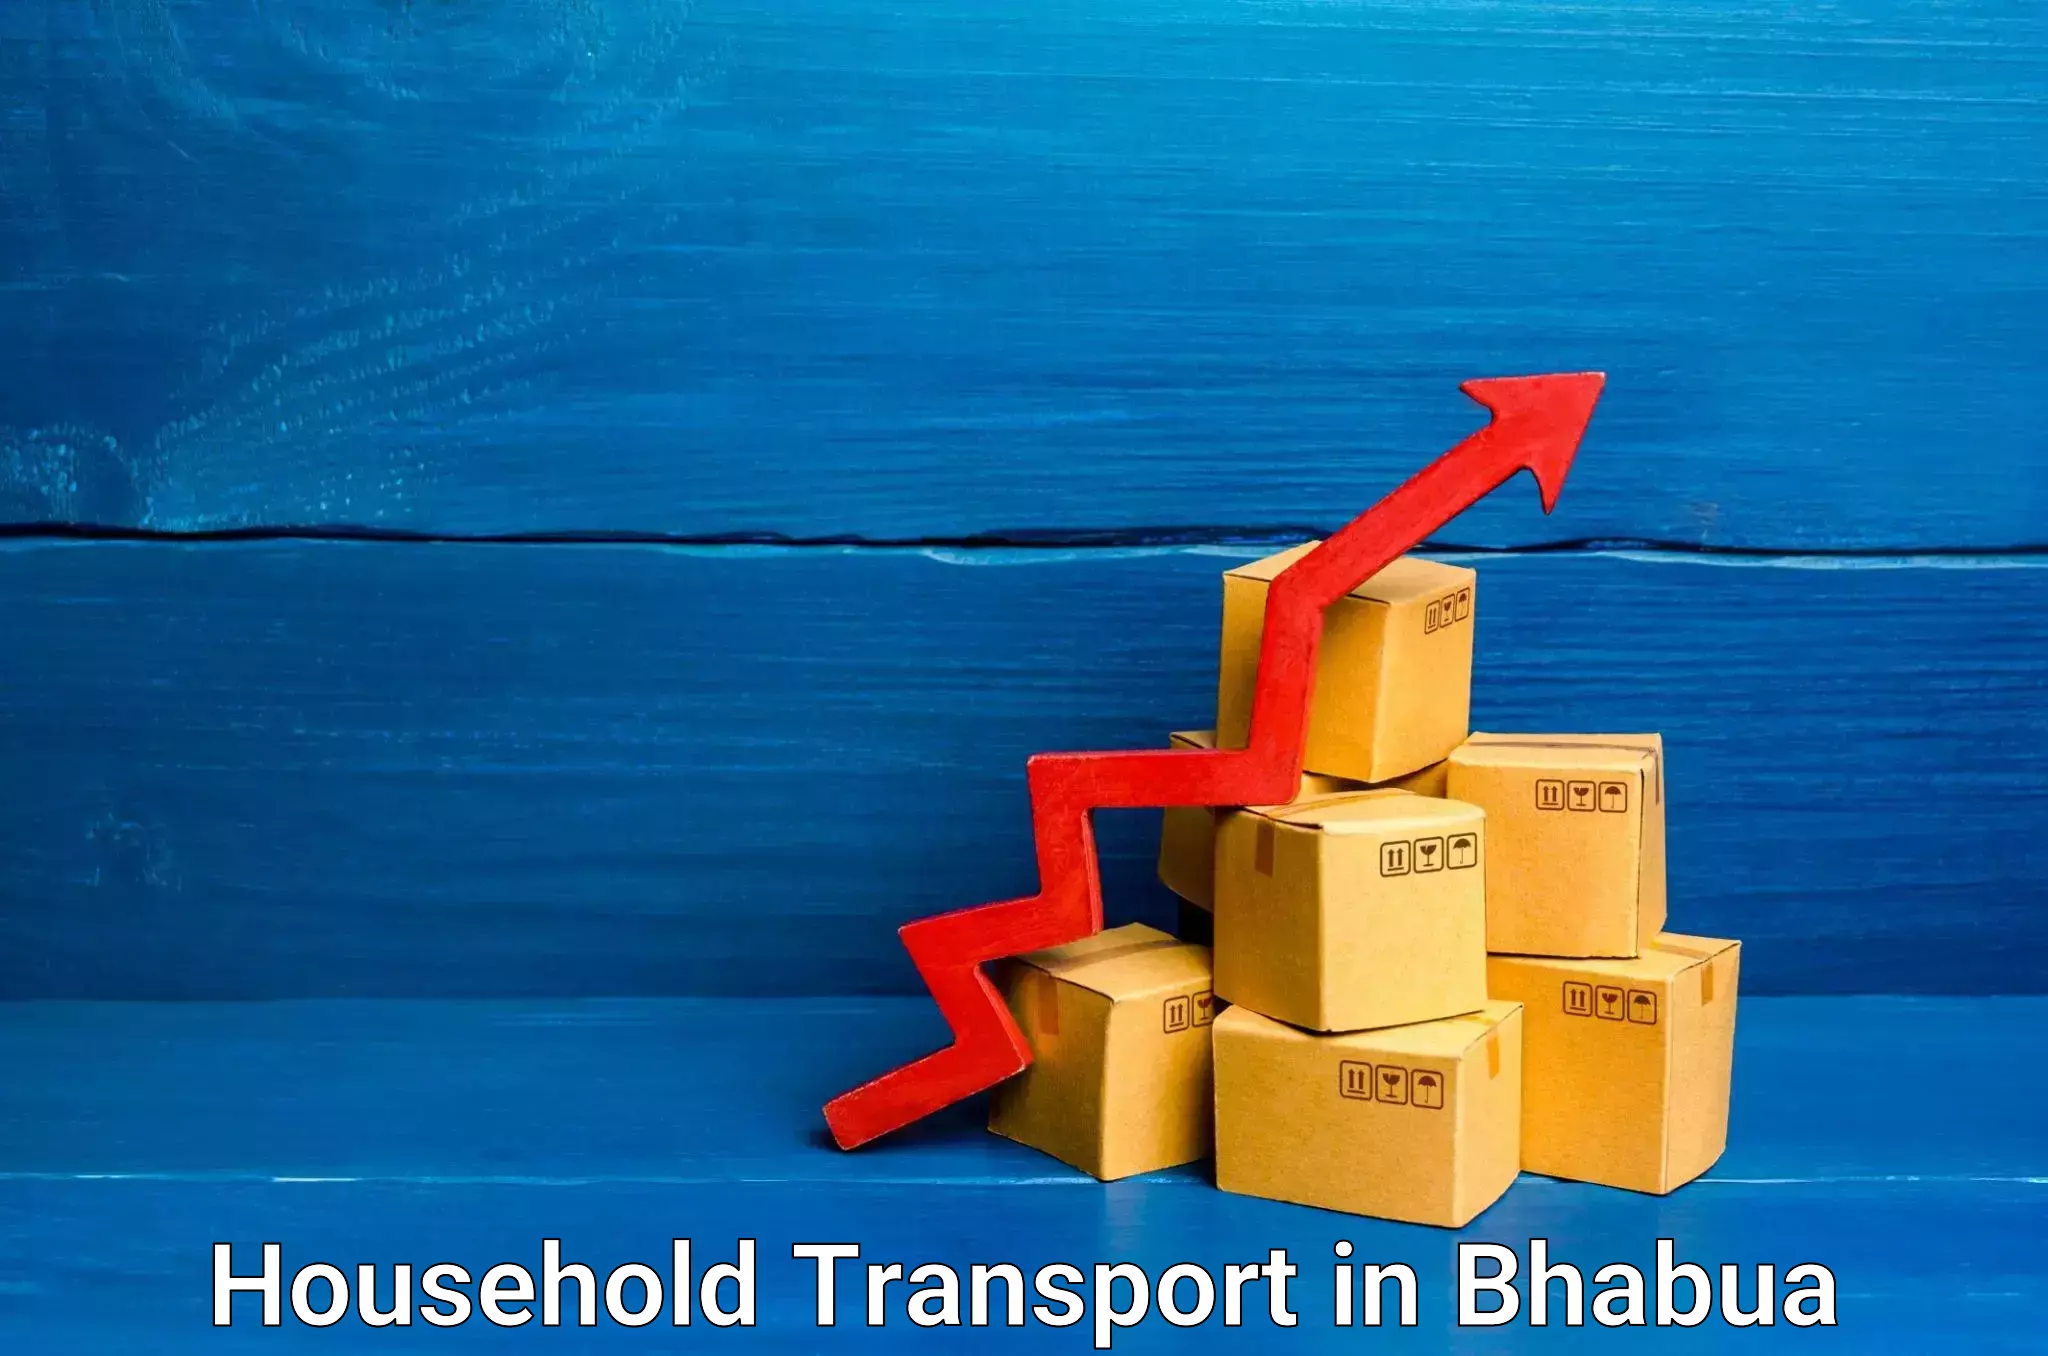 Quality moving and storage in Bhabua